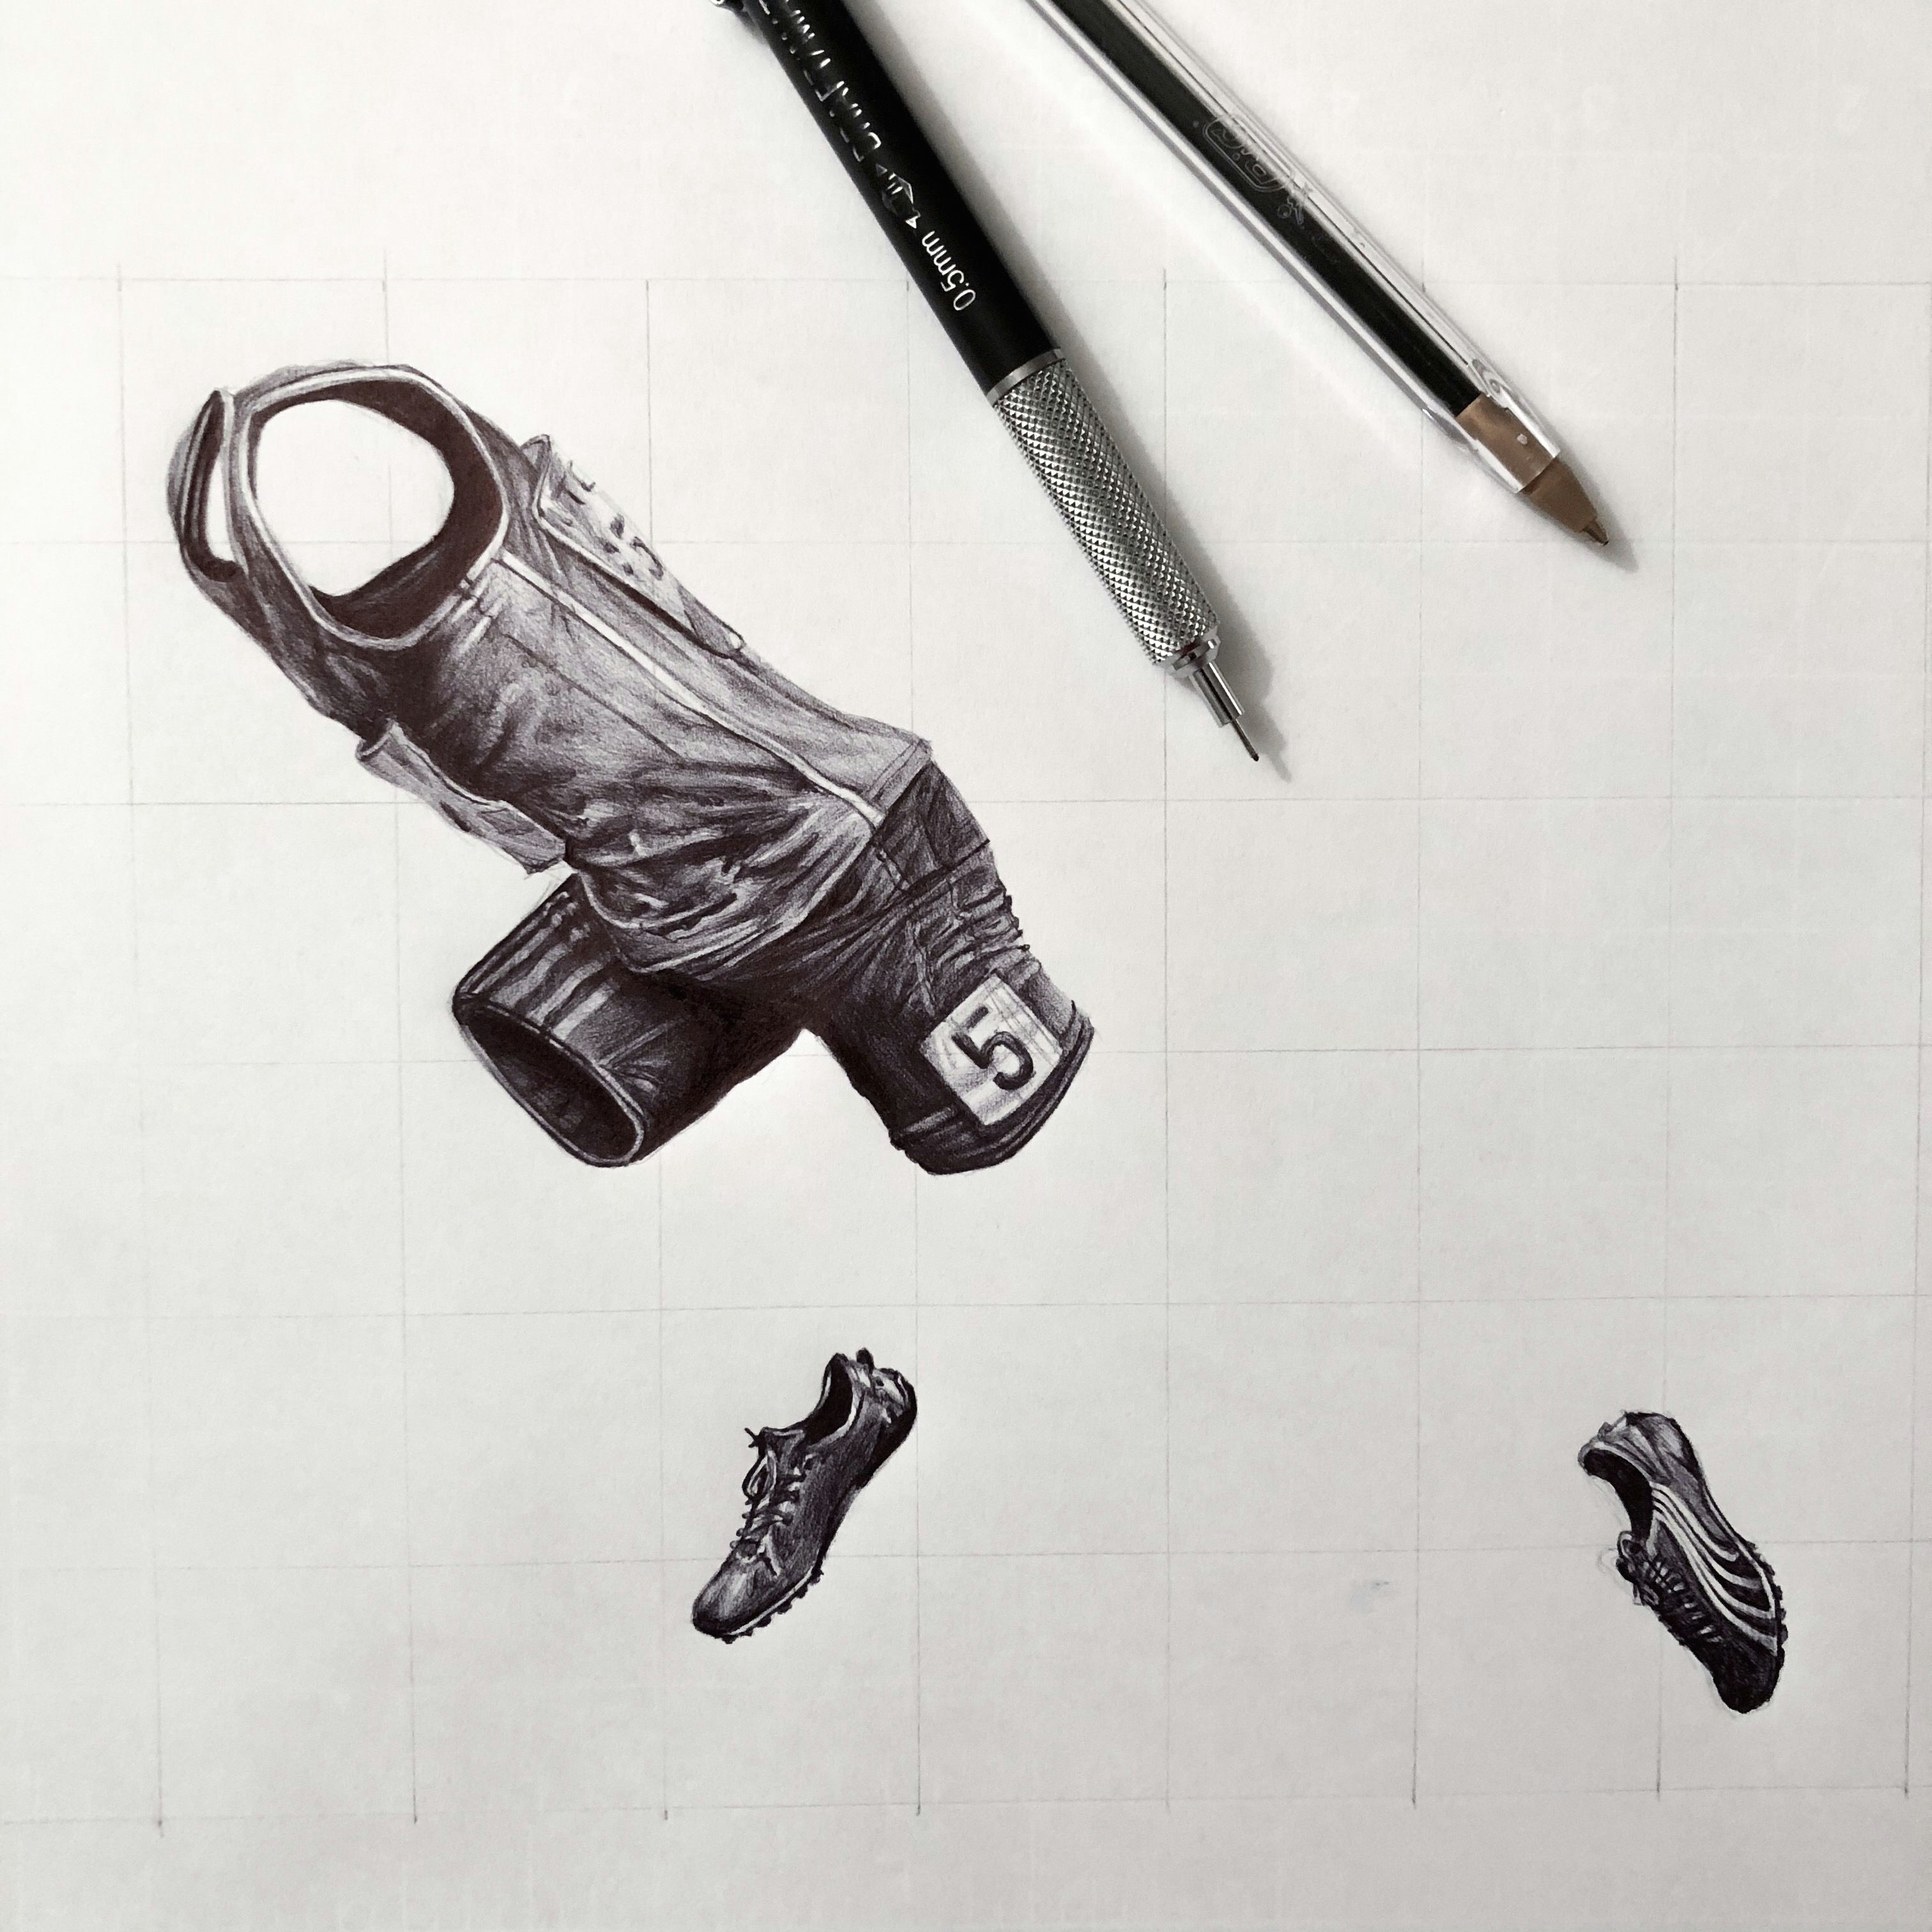 Drawing Ideas In Wall Usain Bolt Track and Field Joey Khamis Design Pen Drawing